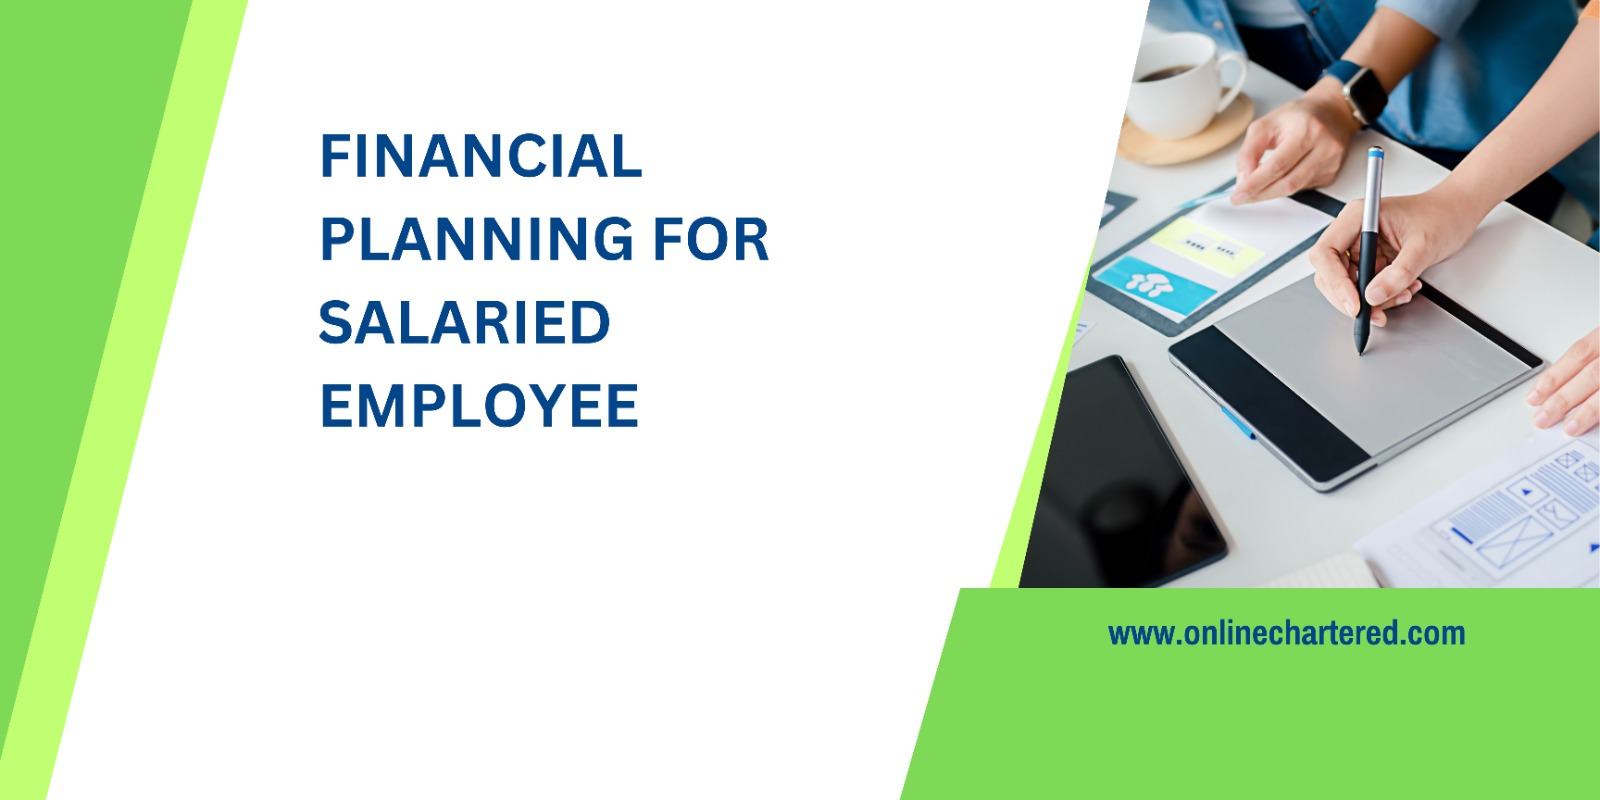 Financial Planning For Salaried Employees | Online Chartered